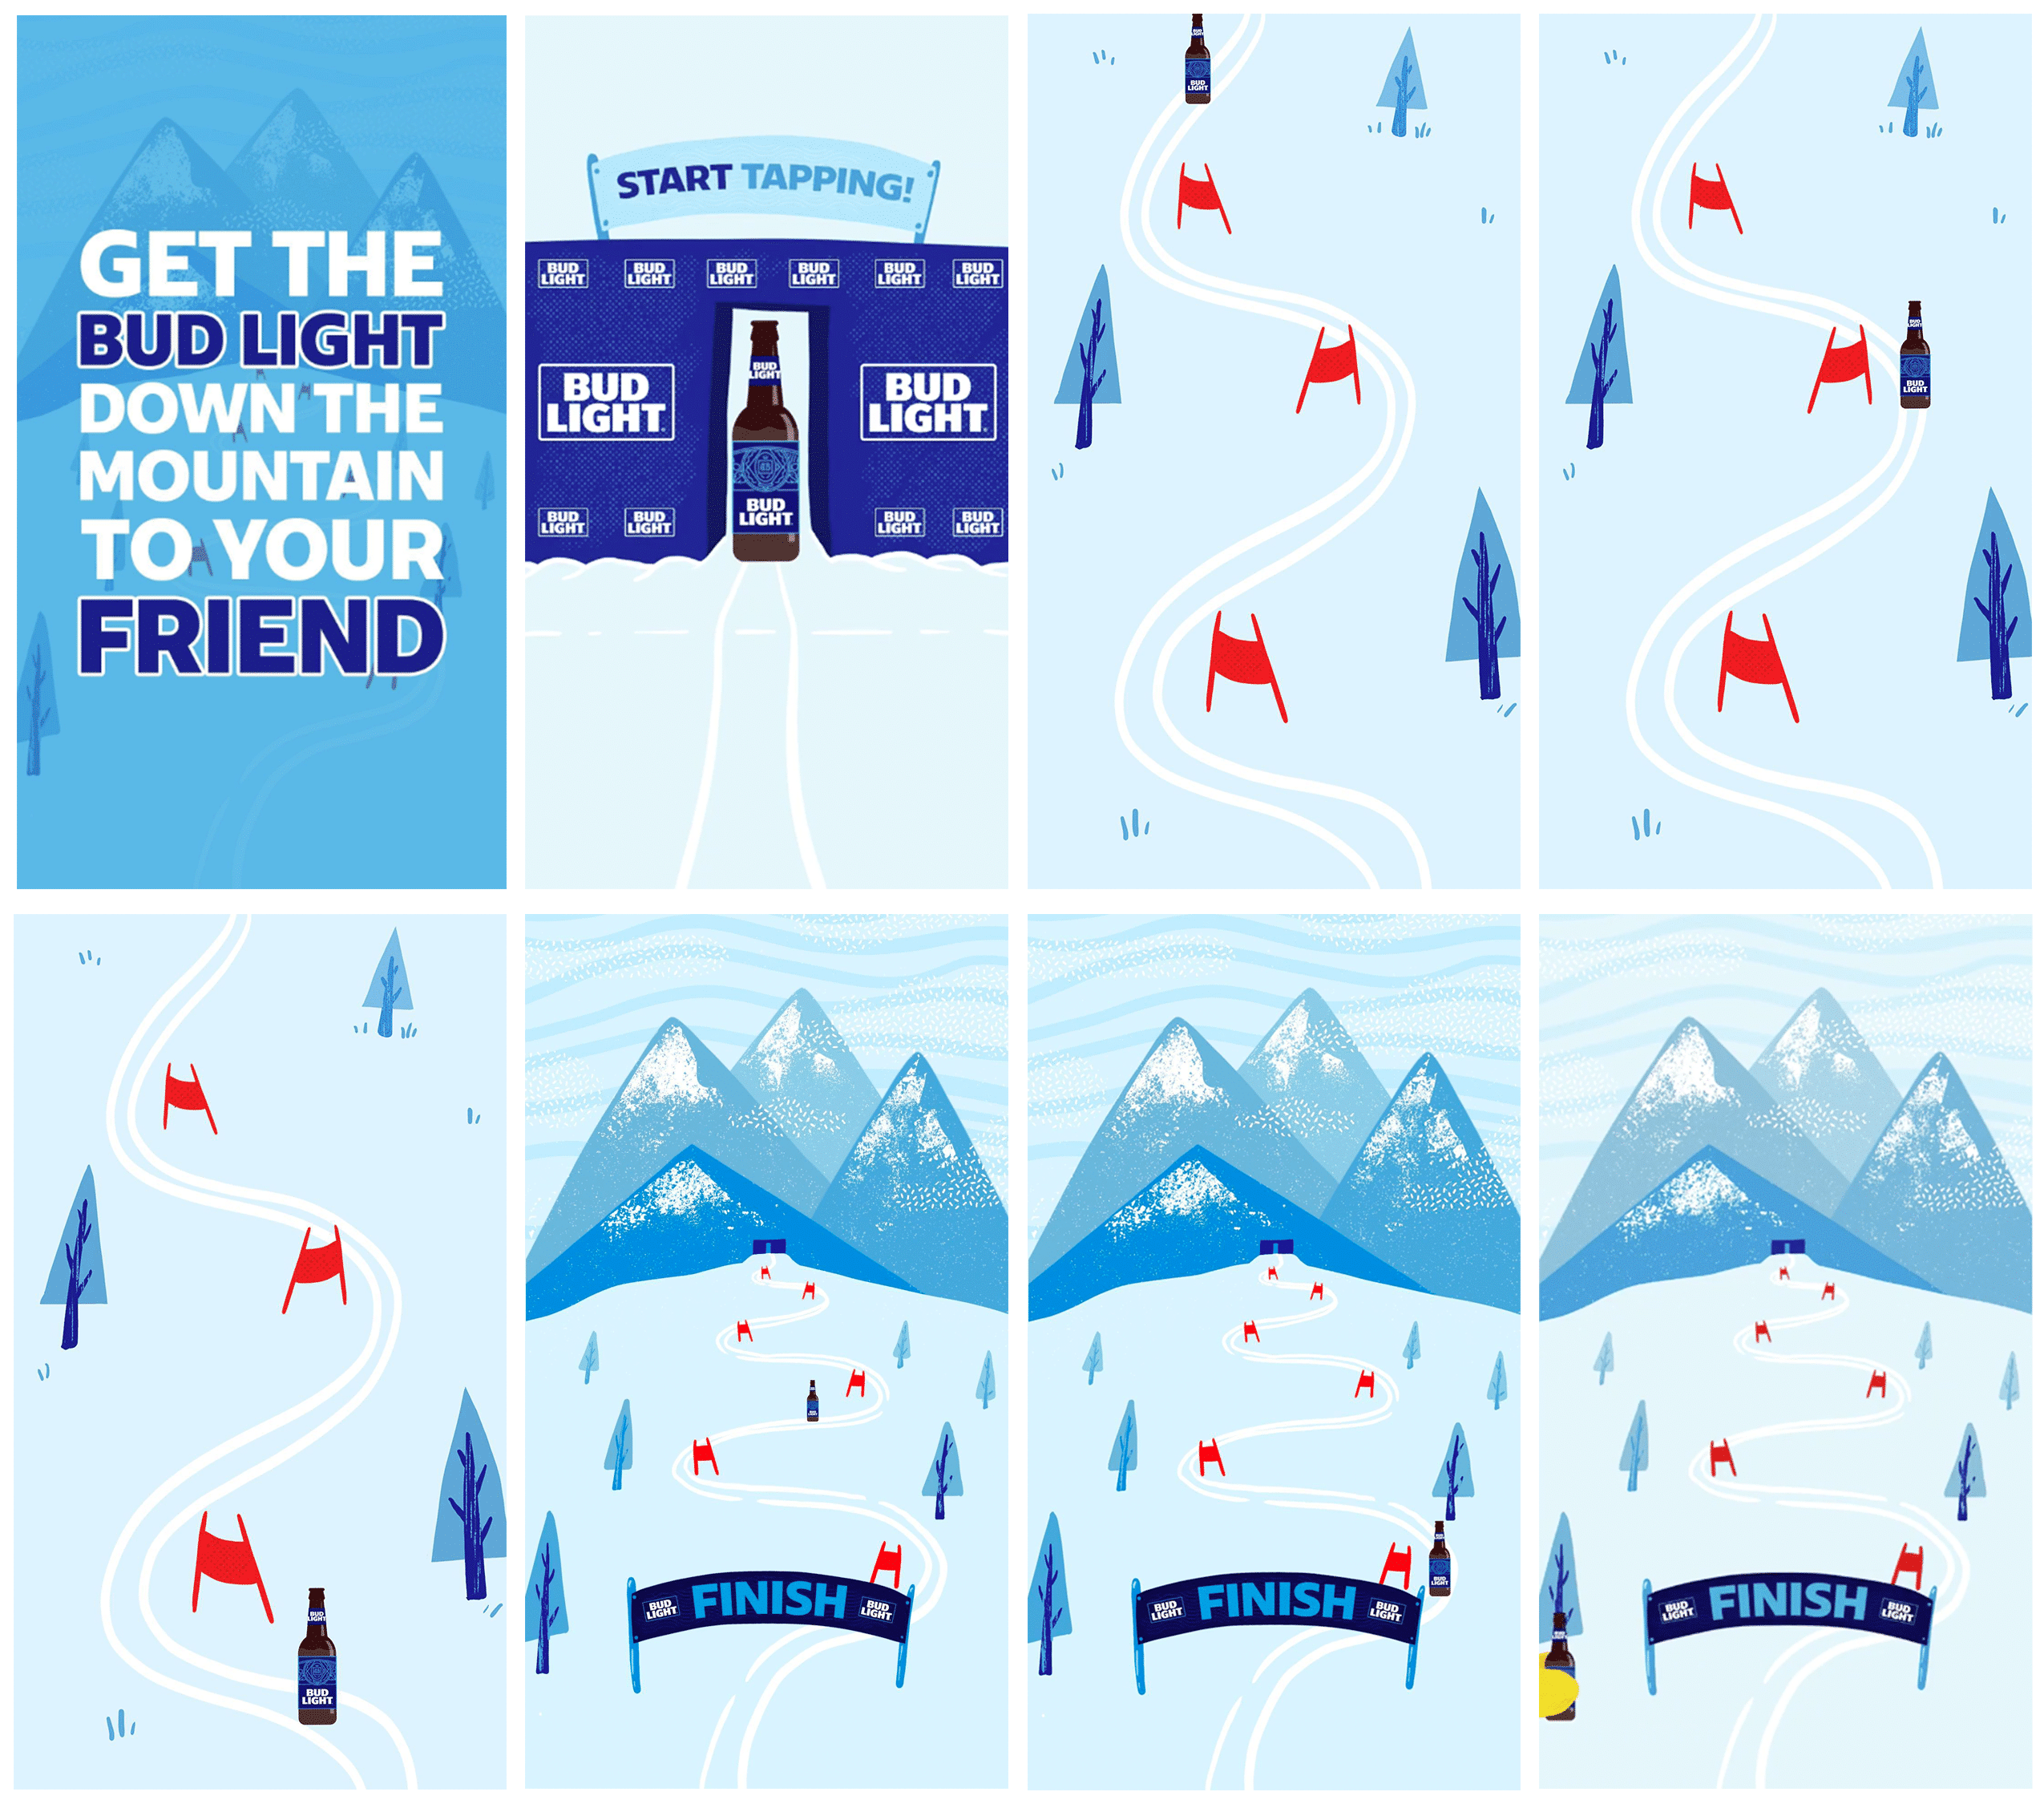 Bud Light Created A Game On Instagram Stories Using Tapping To Help Deliver The Bud Light To Your Friend.